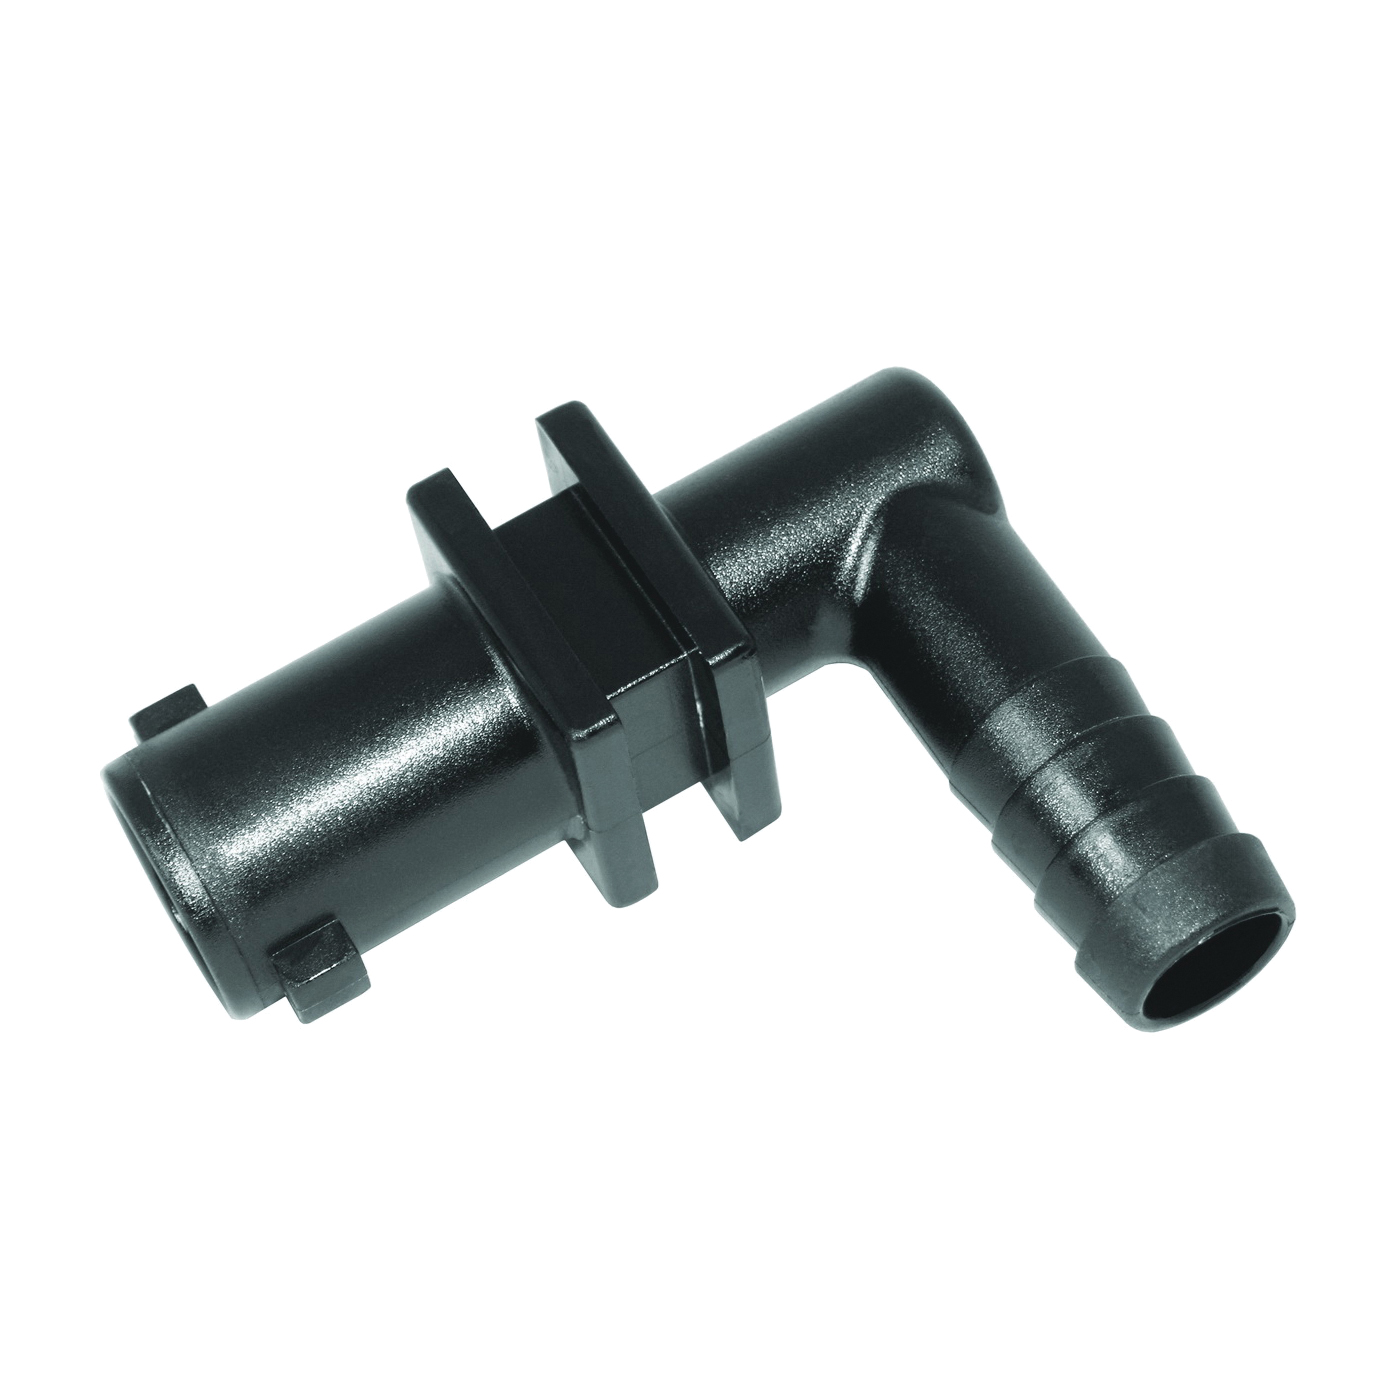 Y8231005 Dry Boom Nozzle Body Elbow, 3/4 in, Quick x Hose Barb, 7 psi Pressure, EPDM Rubber